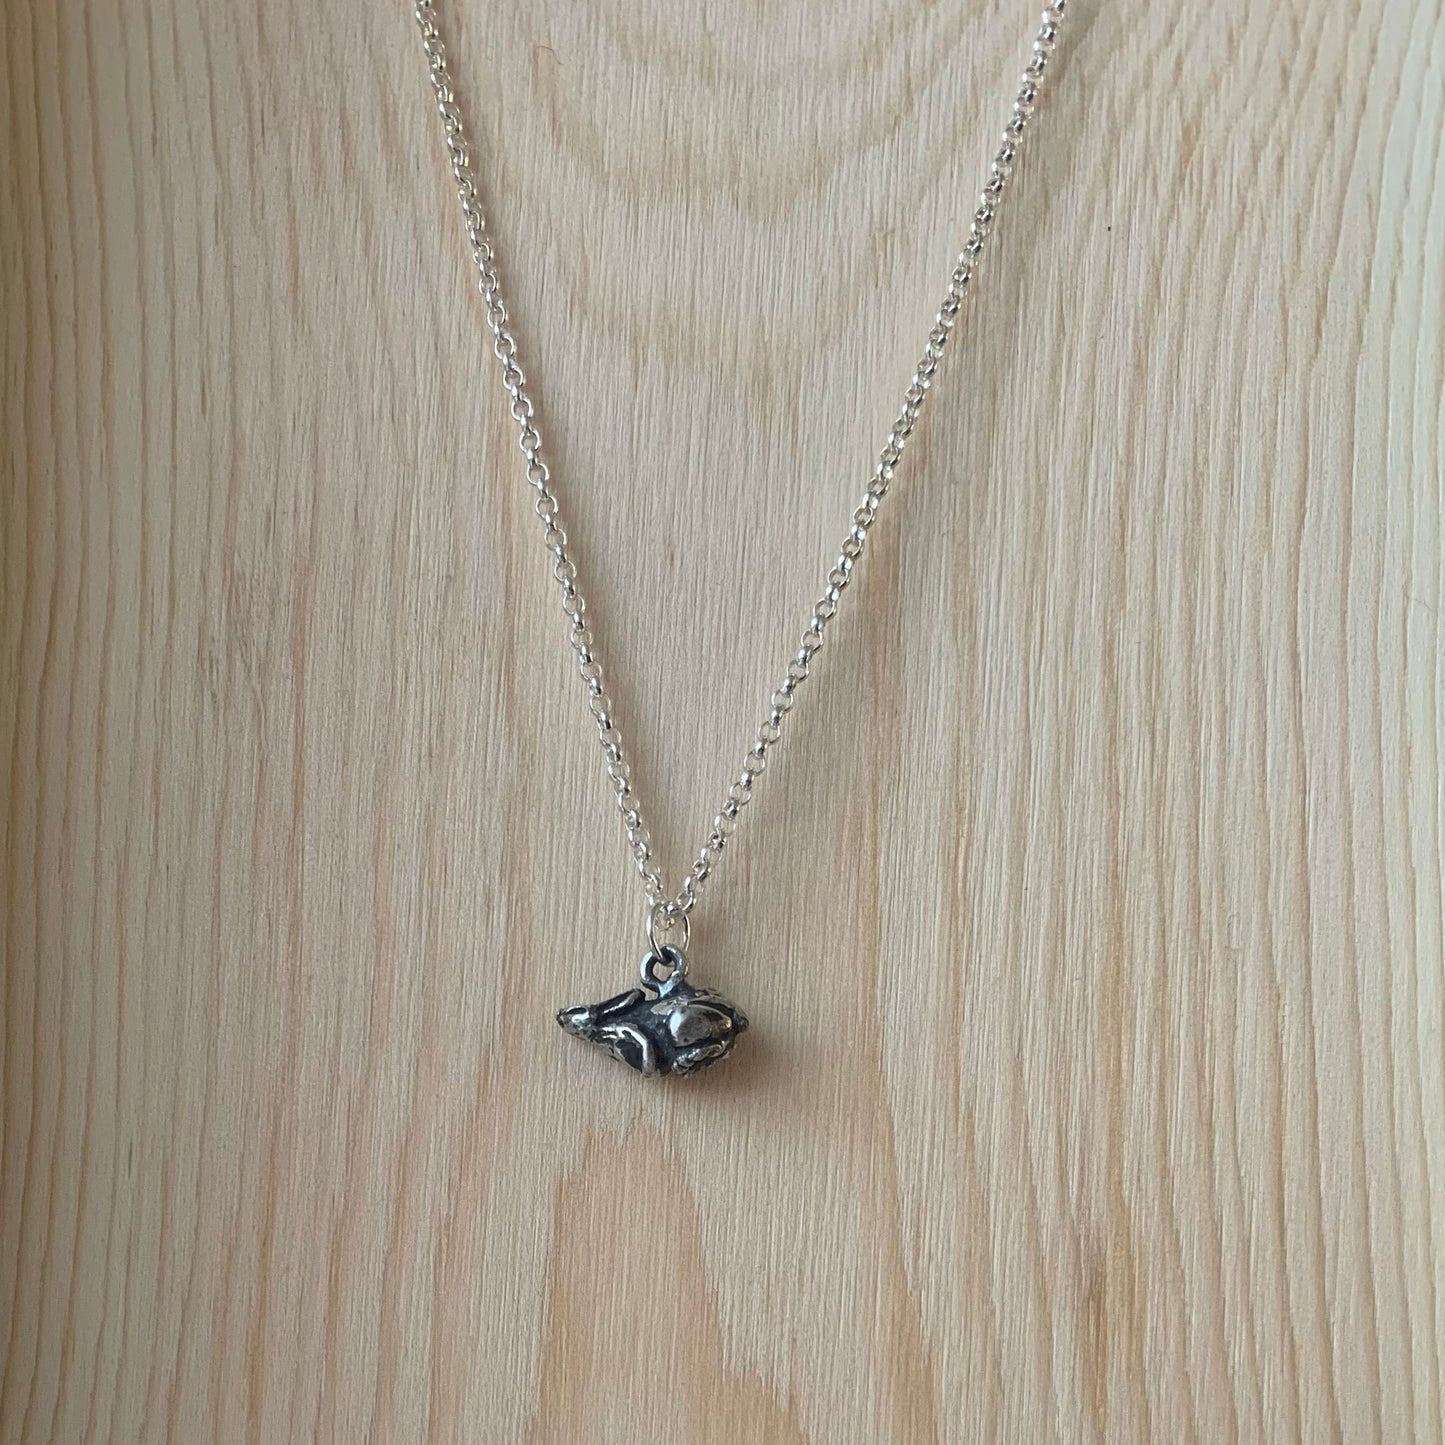 Unmarked Industries Baby Bunny Necklace